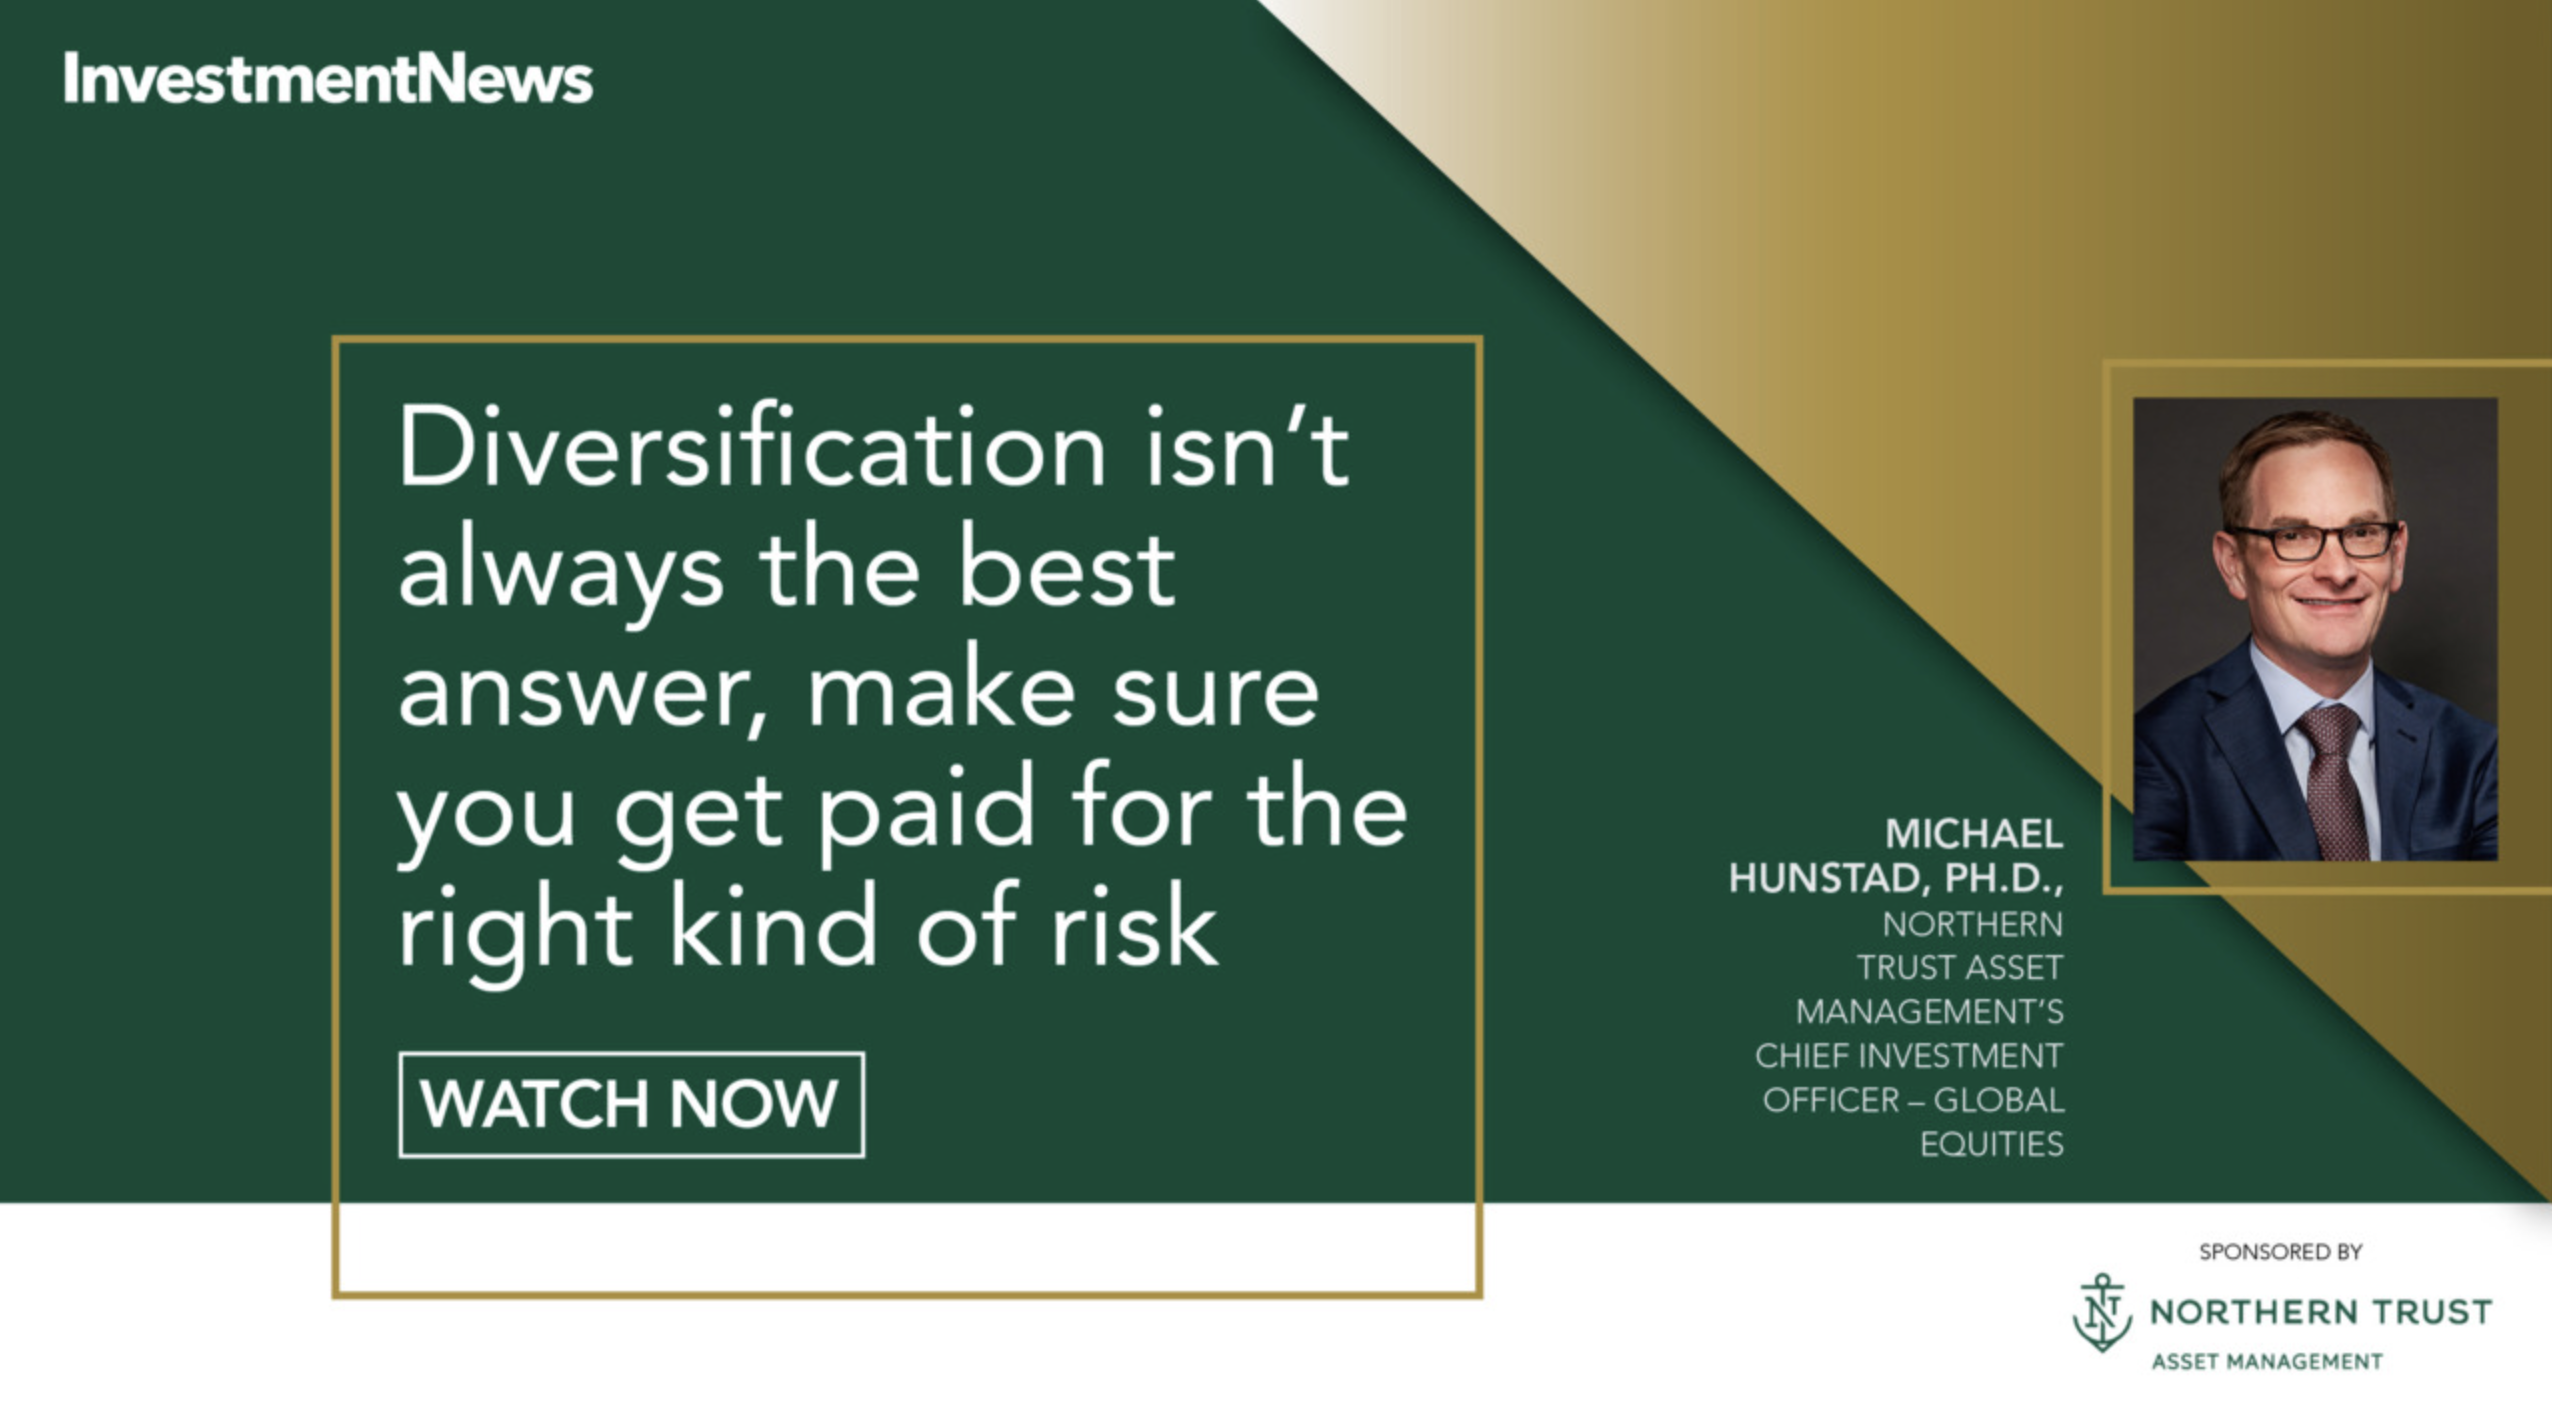 Diversification isn't always the best answer, make sure you get paid for the right kind of risk